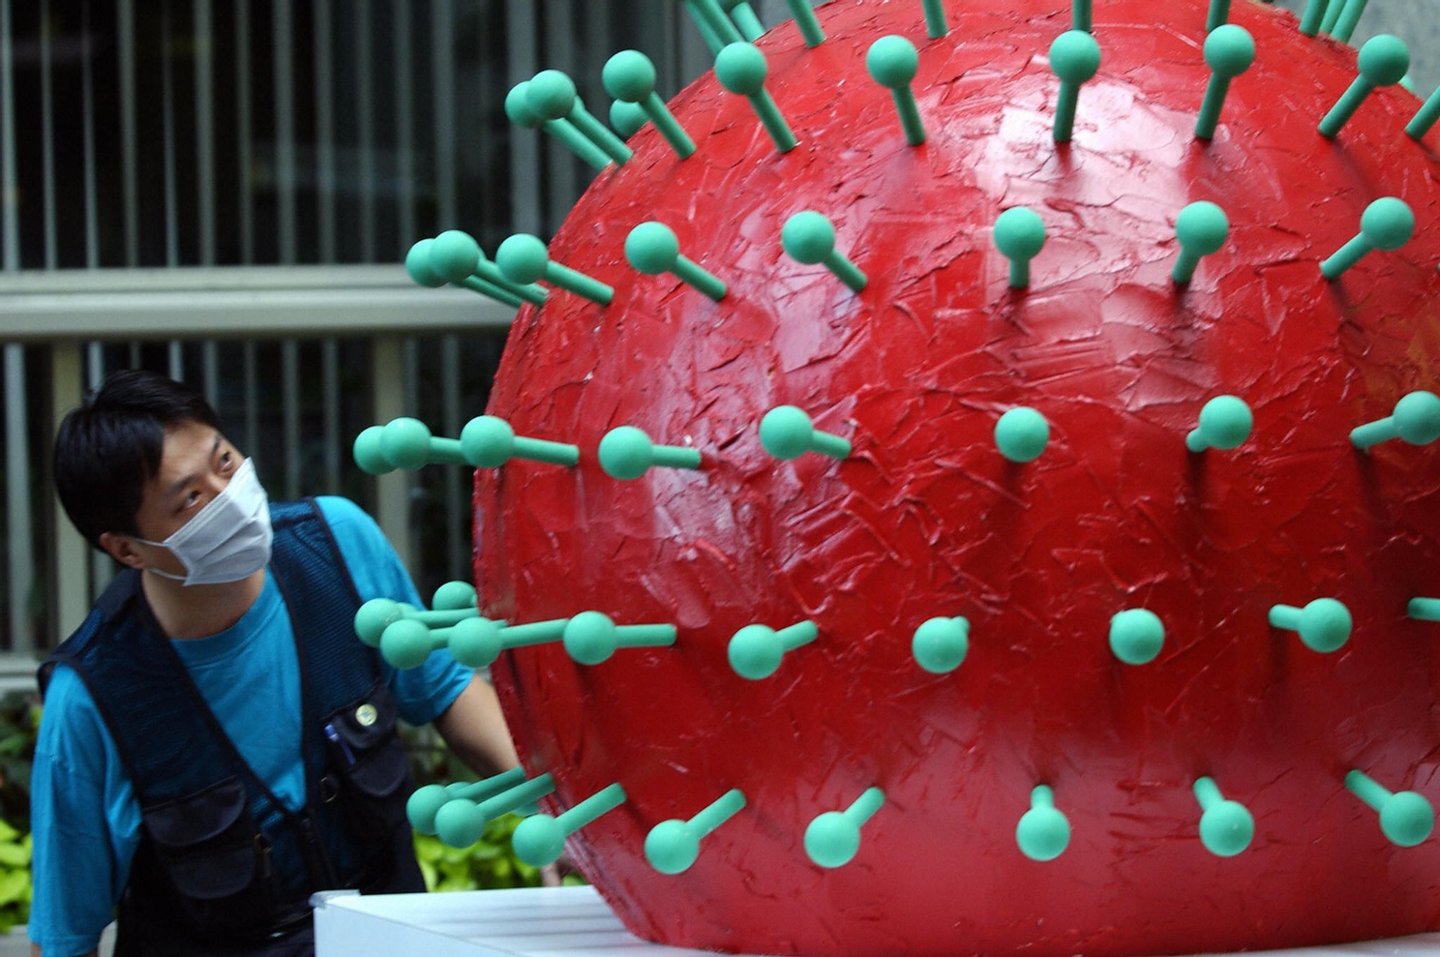 A masked man looks at a model of the coronavirus of SARS at city hall in Taipei, 17 May 2003.  Taiwan replaced its health minister Twu Shiing-jer on May16 as anger mounted over the government's handling of the SARS crisis, while hopes grew that Singapore would become the third country to declare victory over the disease.   AFP PHOTO/Sam YEH  (Photo credit should read SAM YEH/AFP/Getty Images)